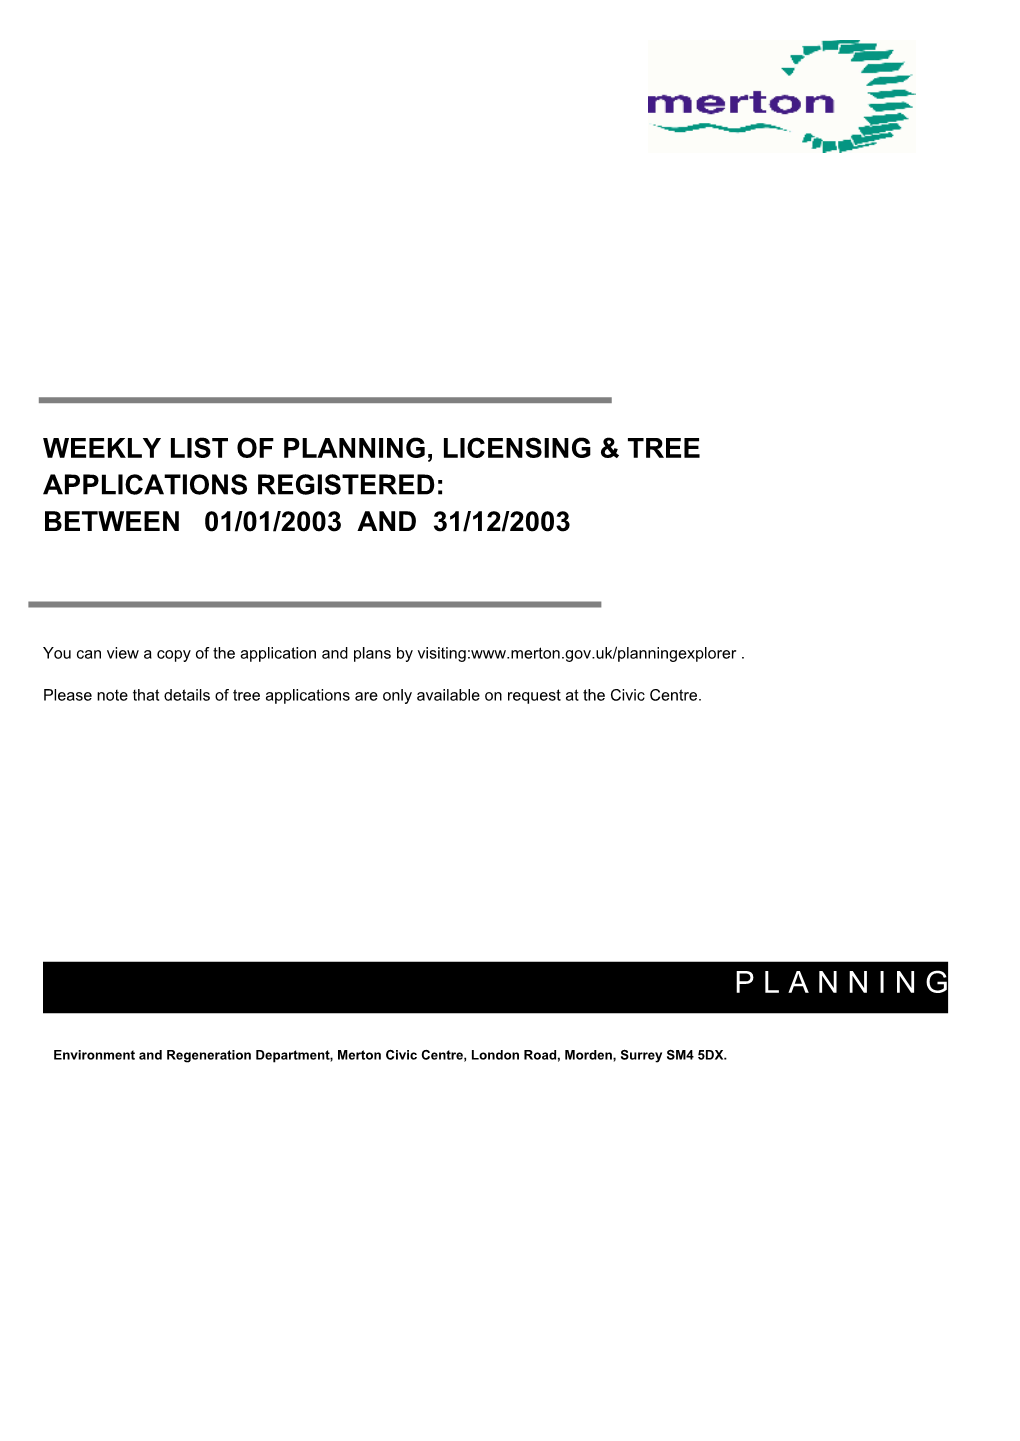 2003 Planning and Tree Applications